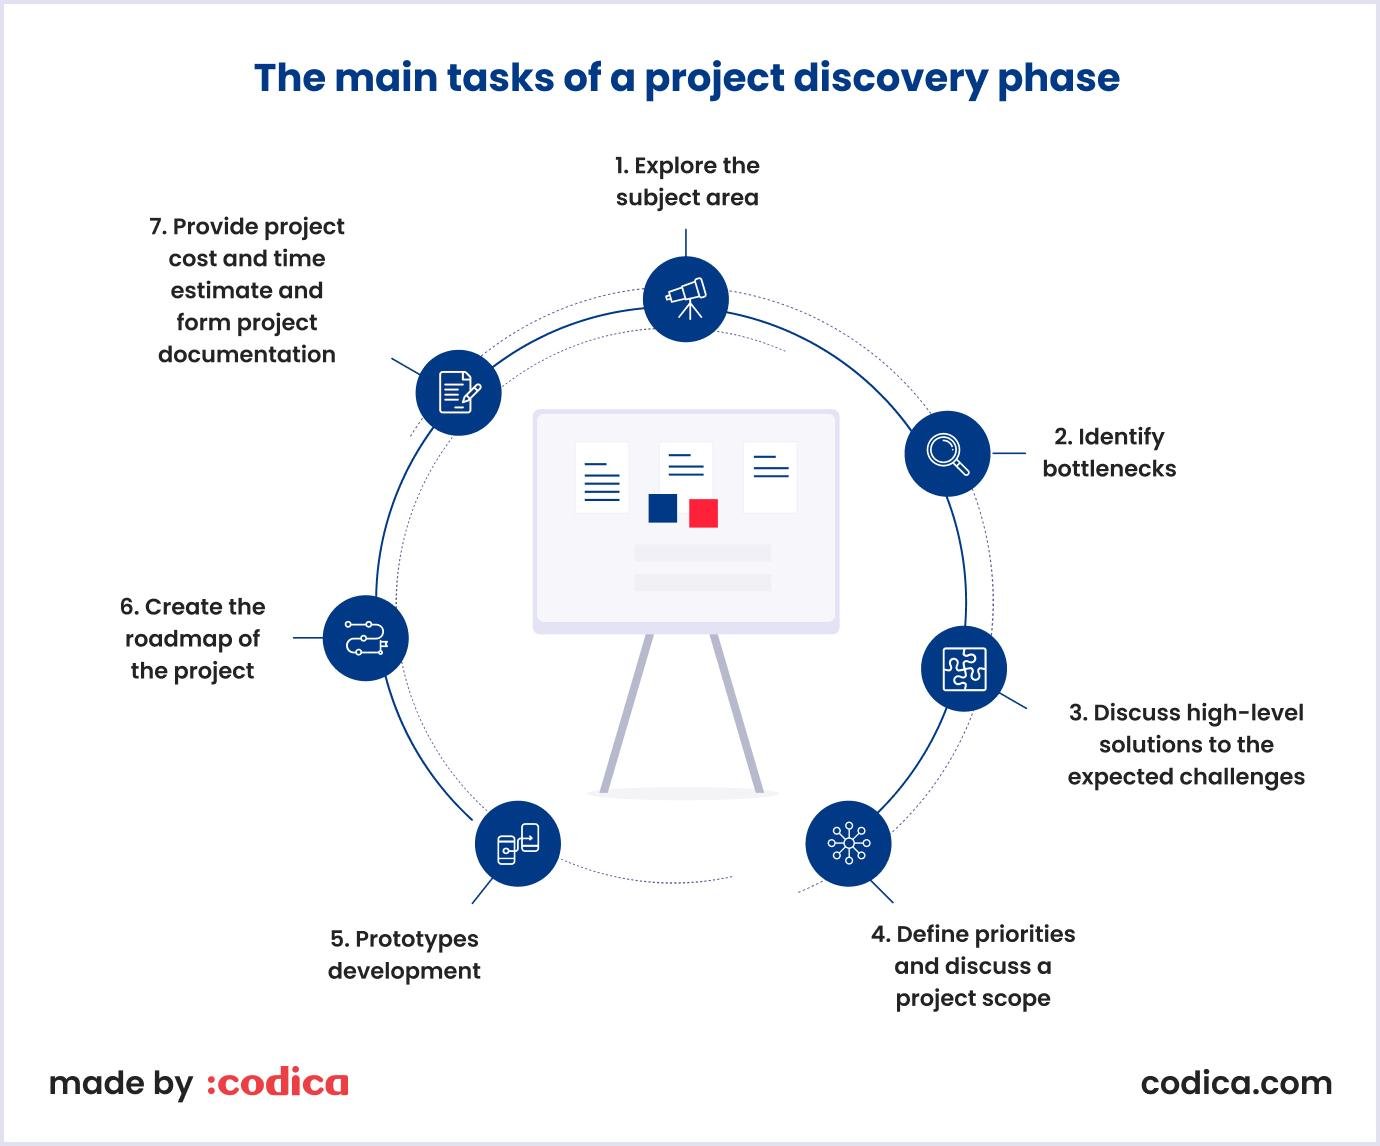 The project discovery phase at the  Codica development company